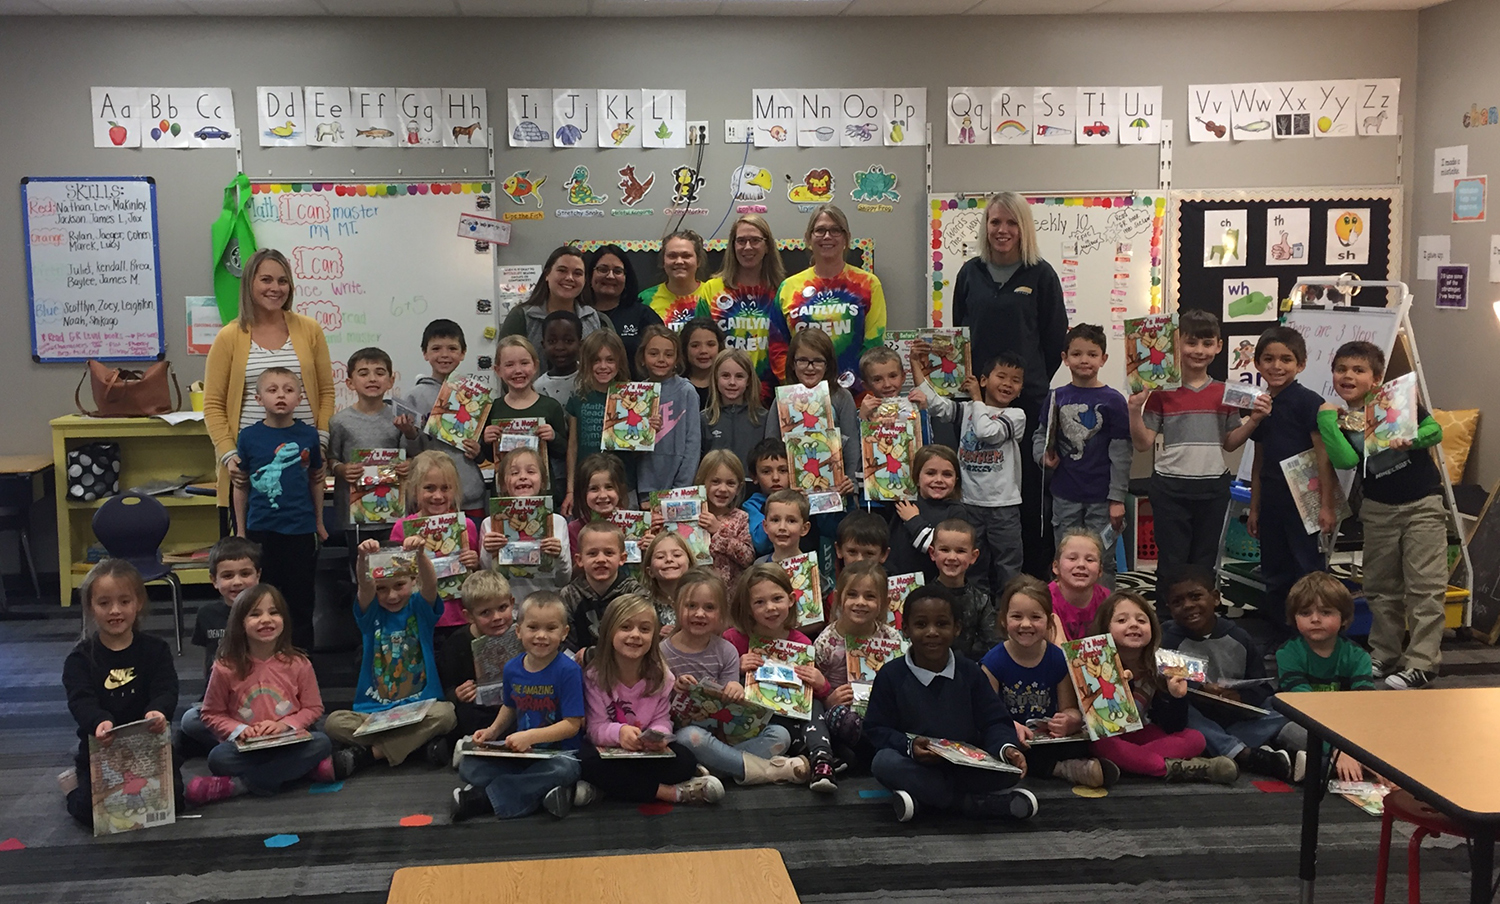 Book giveaway for Mrs. Nielsen’s class and Mrs. Kraayenbrinks class, Hadley Ziegler and Hannah Farris are student teachers, at Harrisburg Horizon Elementary on Nov 22